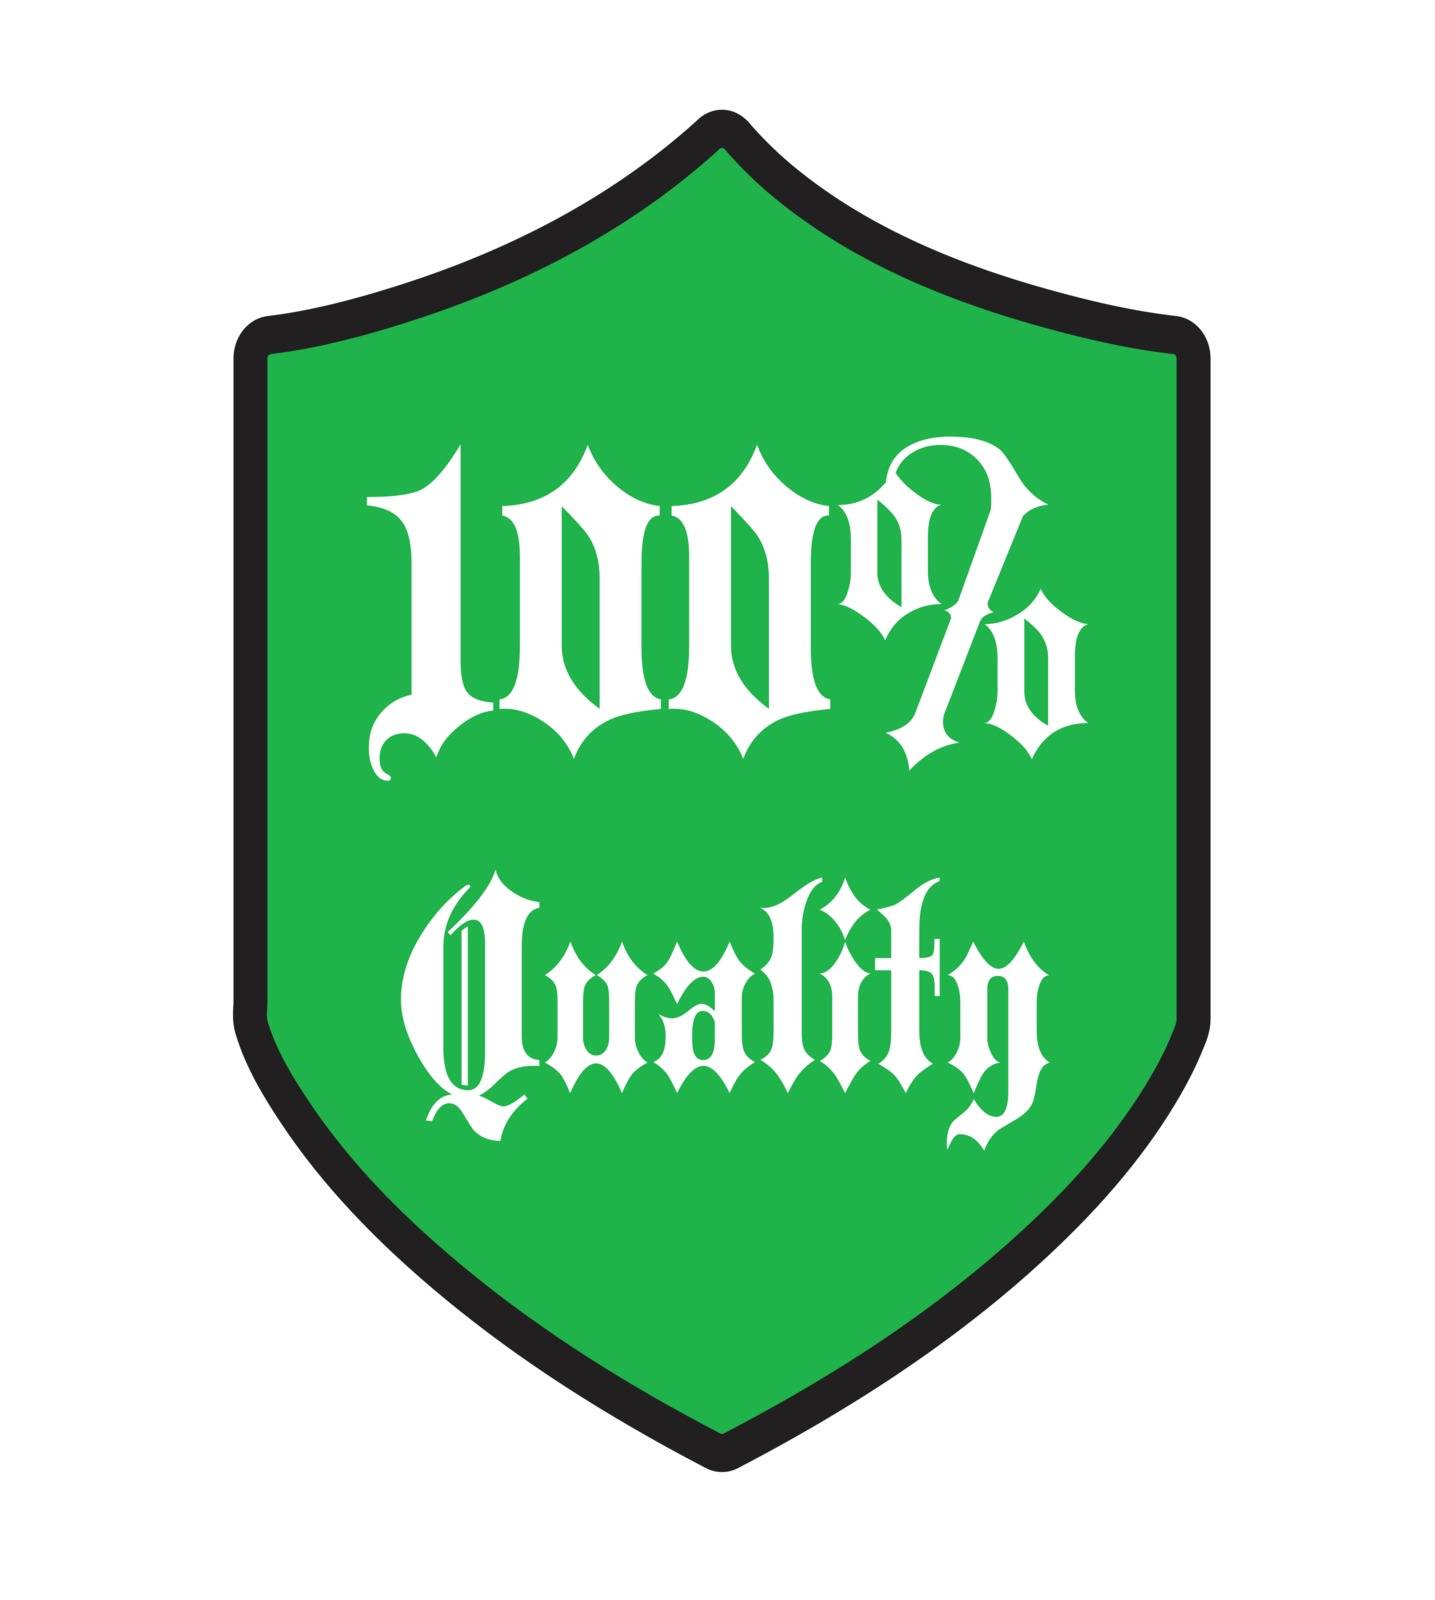 A green quality guarenteed sticker over a white background with white text